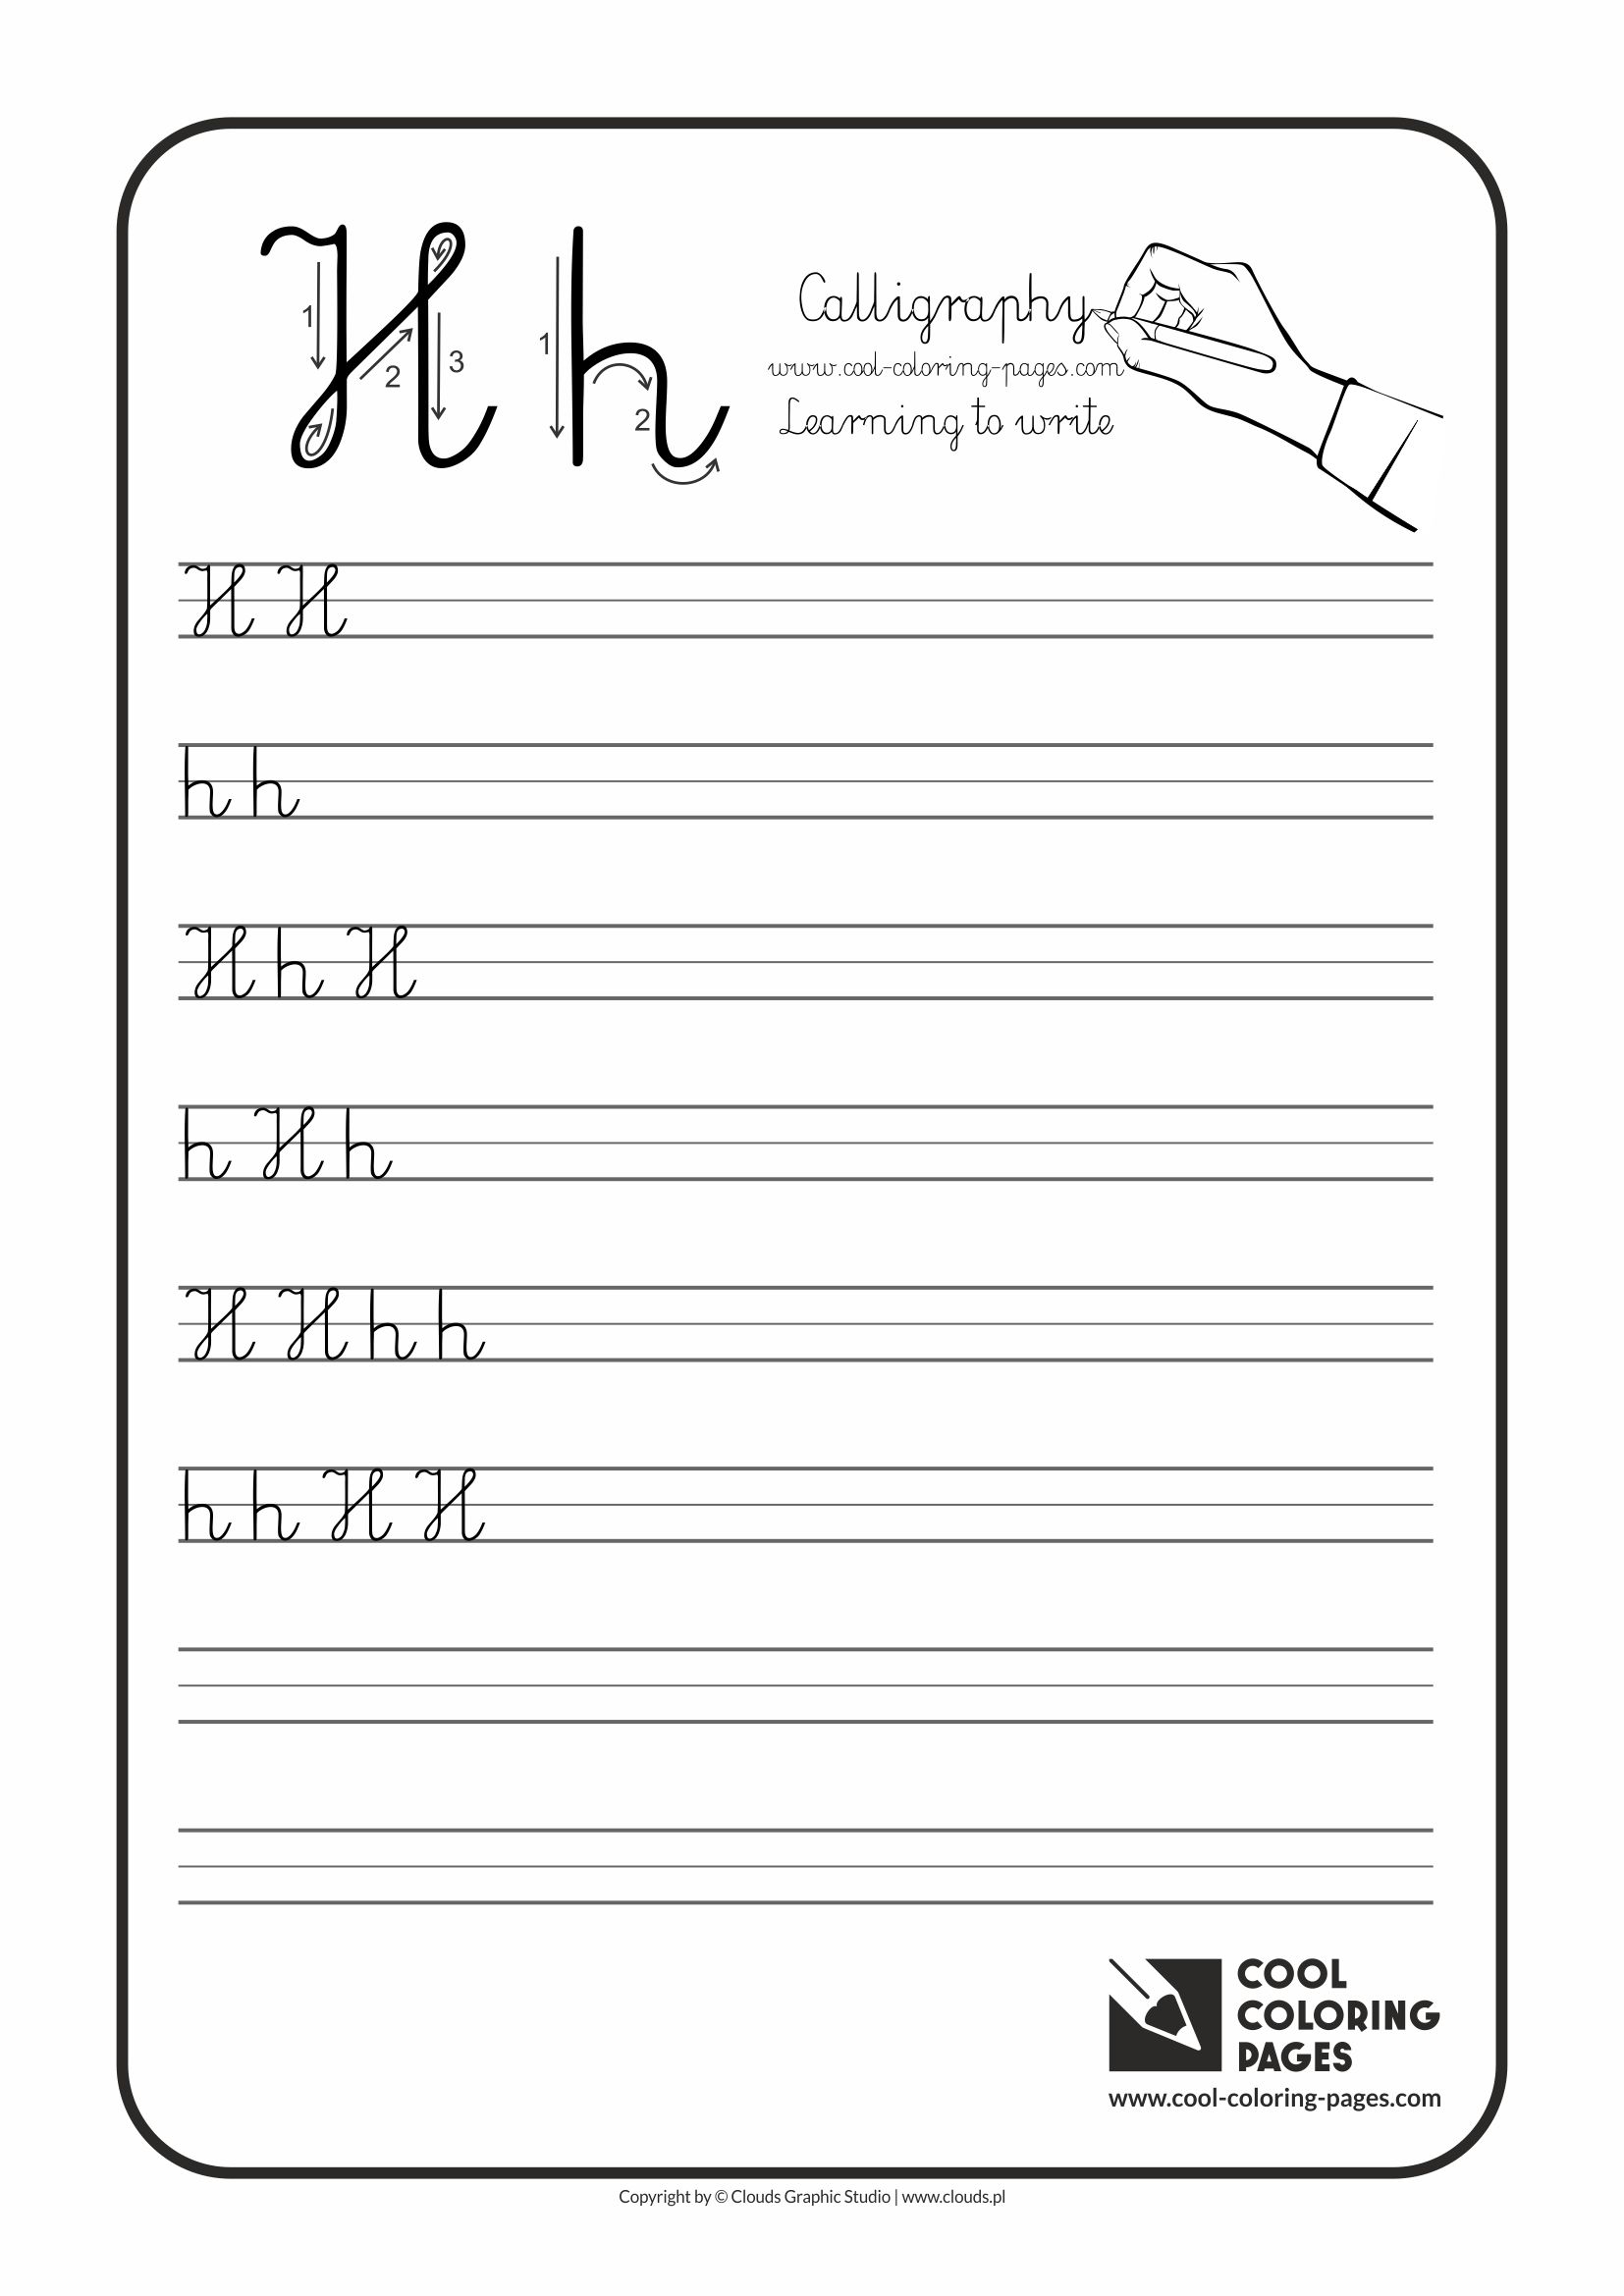 Cool coloring pages calligraphy for kids